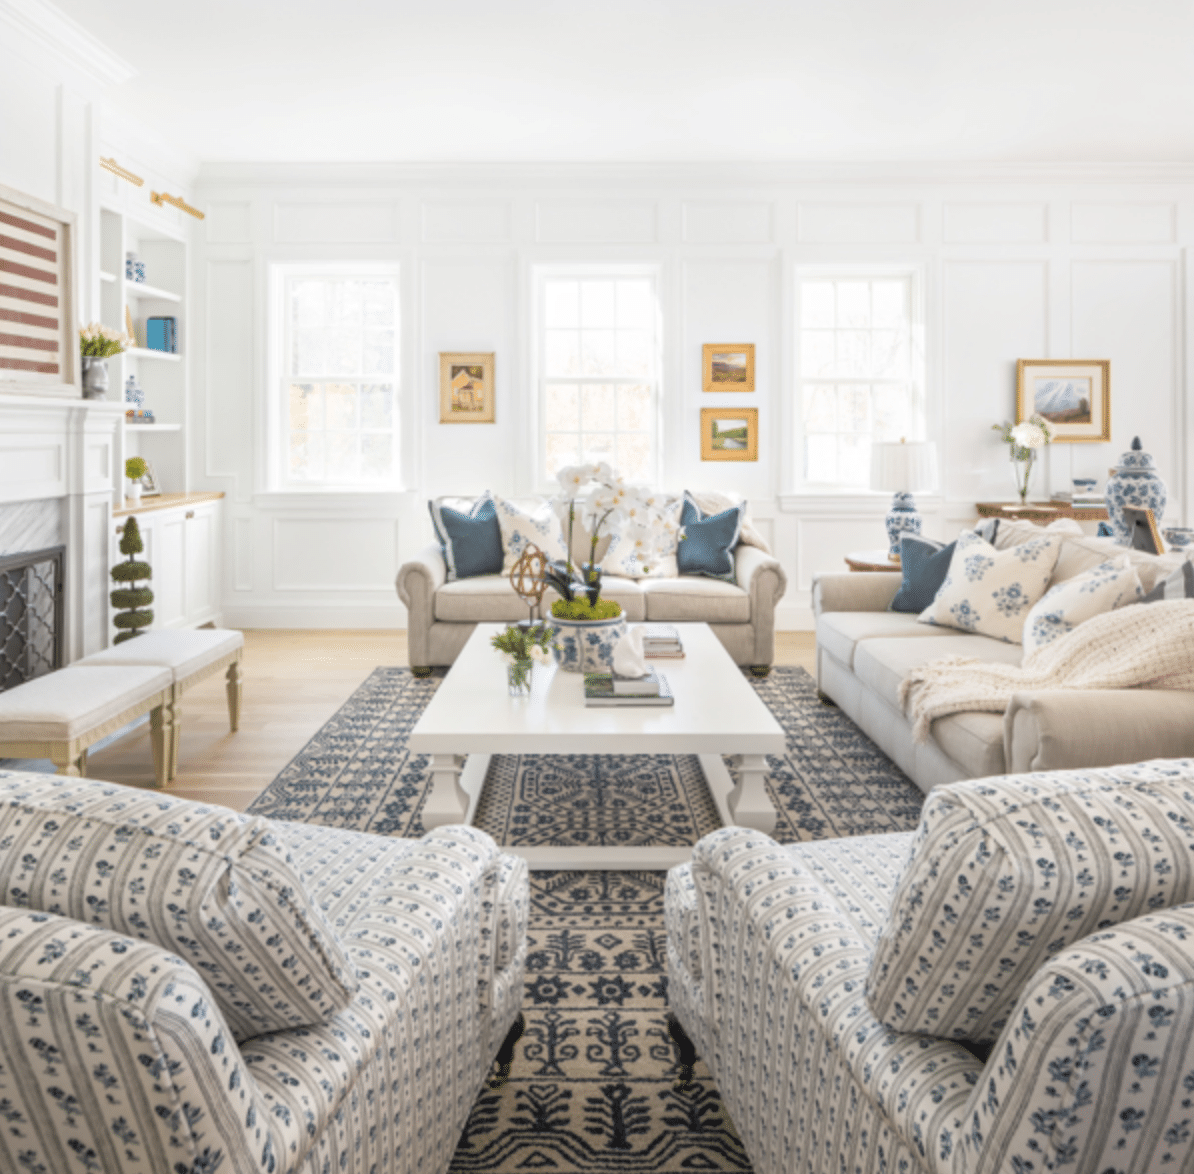 The Fox Group | Scott Davis Photography White Colonial House living room in blue and white